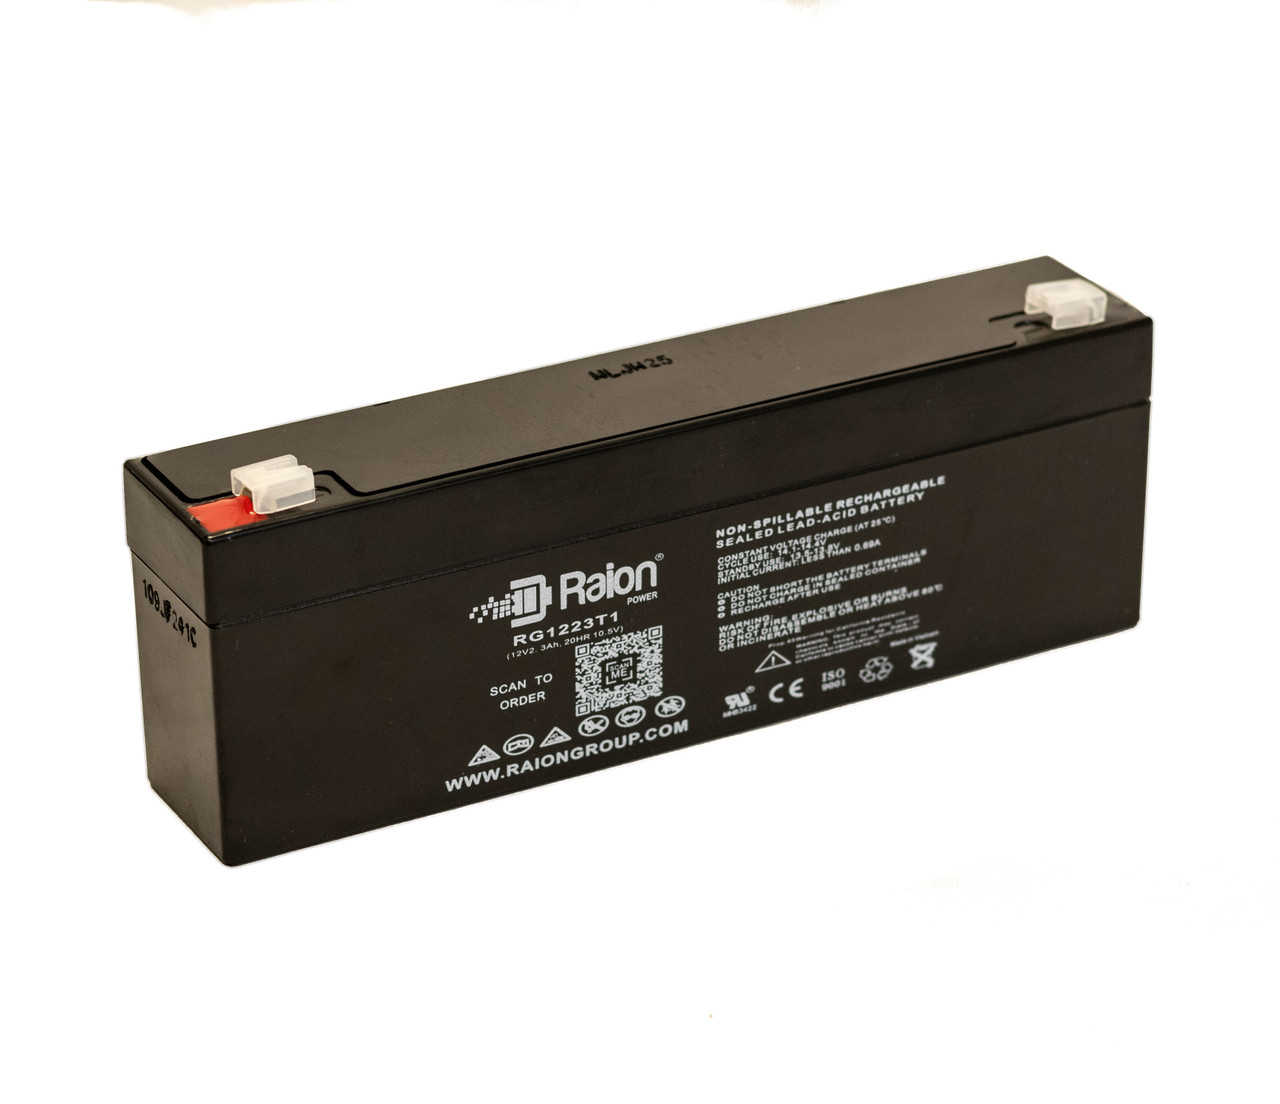 Raion Power RG1223T1 Replacement Battery for IKEGAMU SLAC-12500